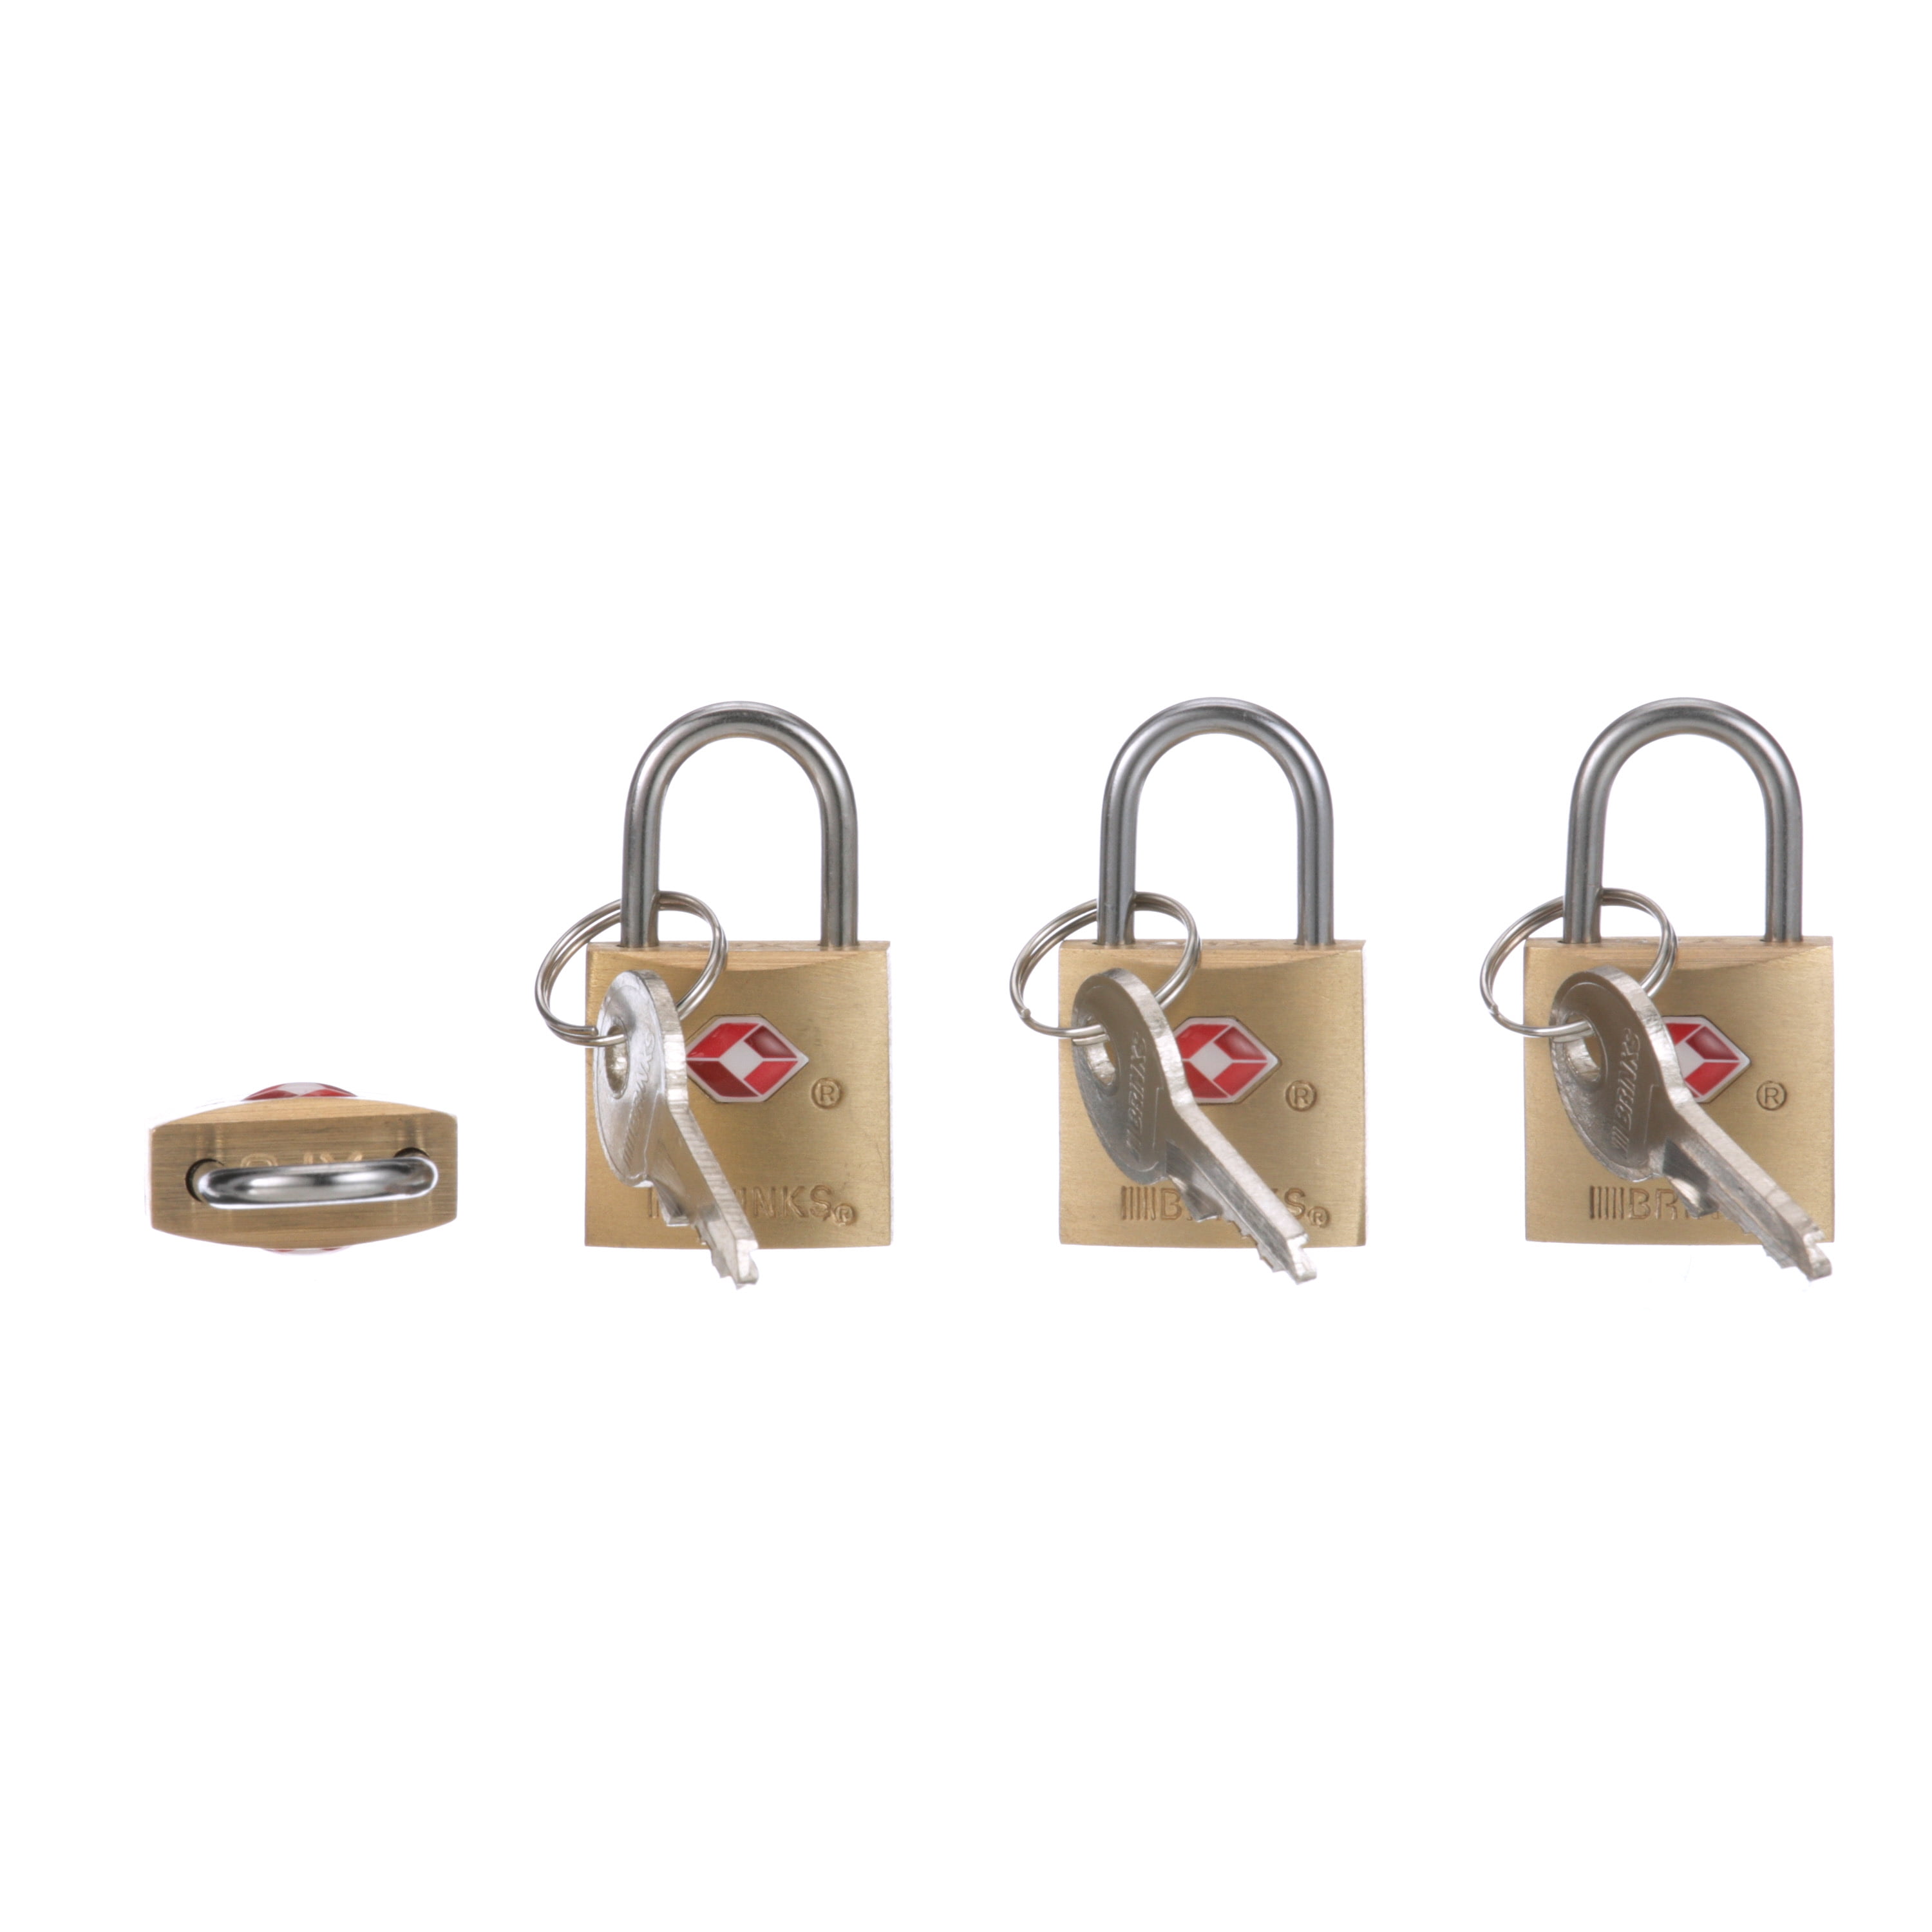 Brinks 161-20271 TSA Approved 22mm Luggage Lock Solid Brass 2-Pack